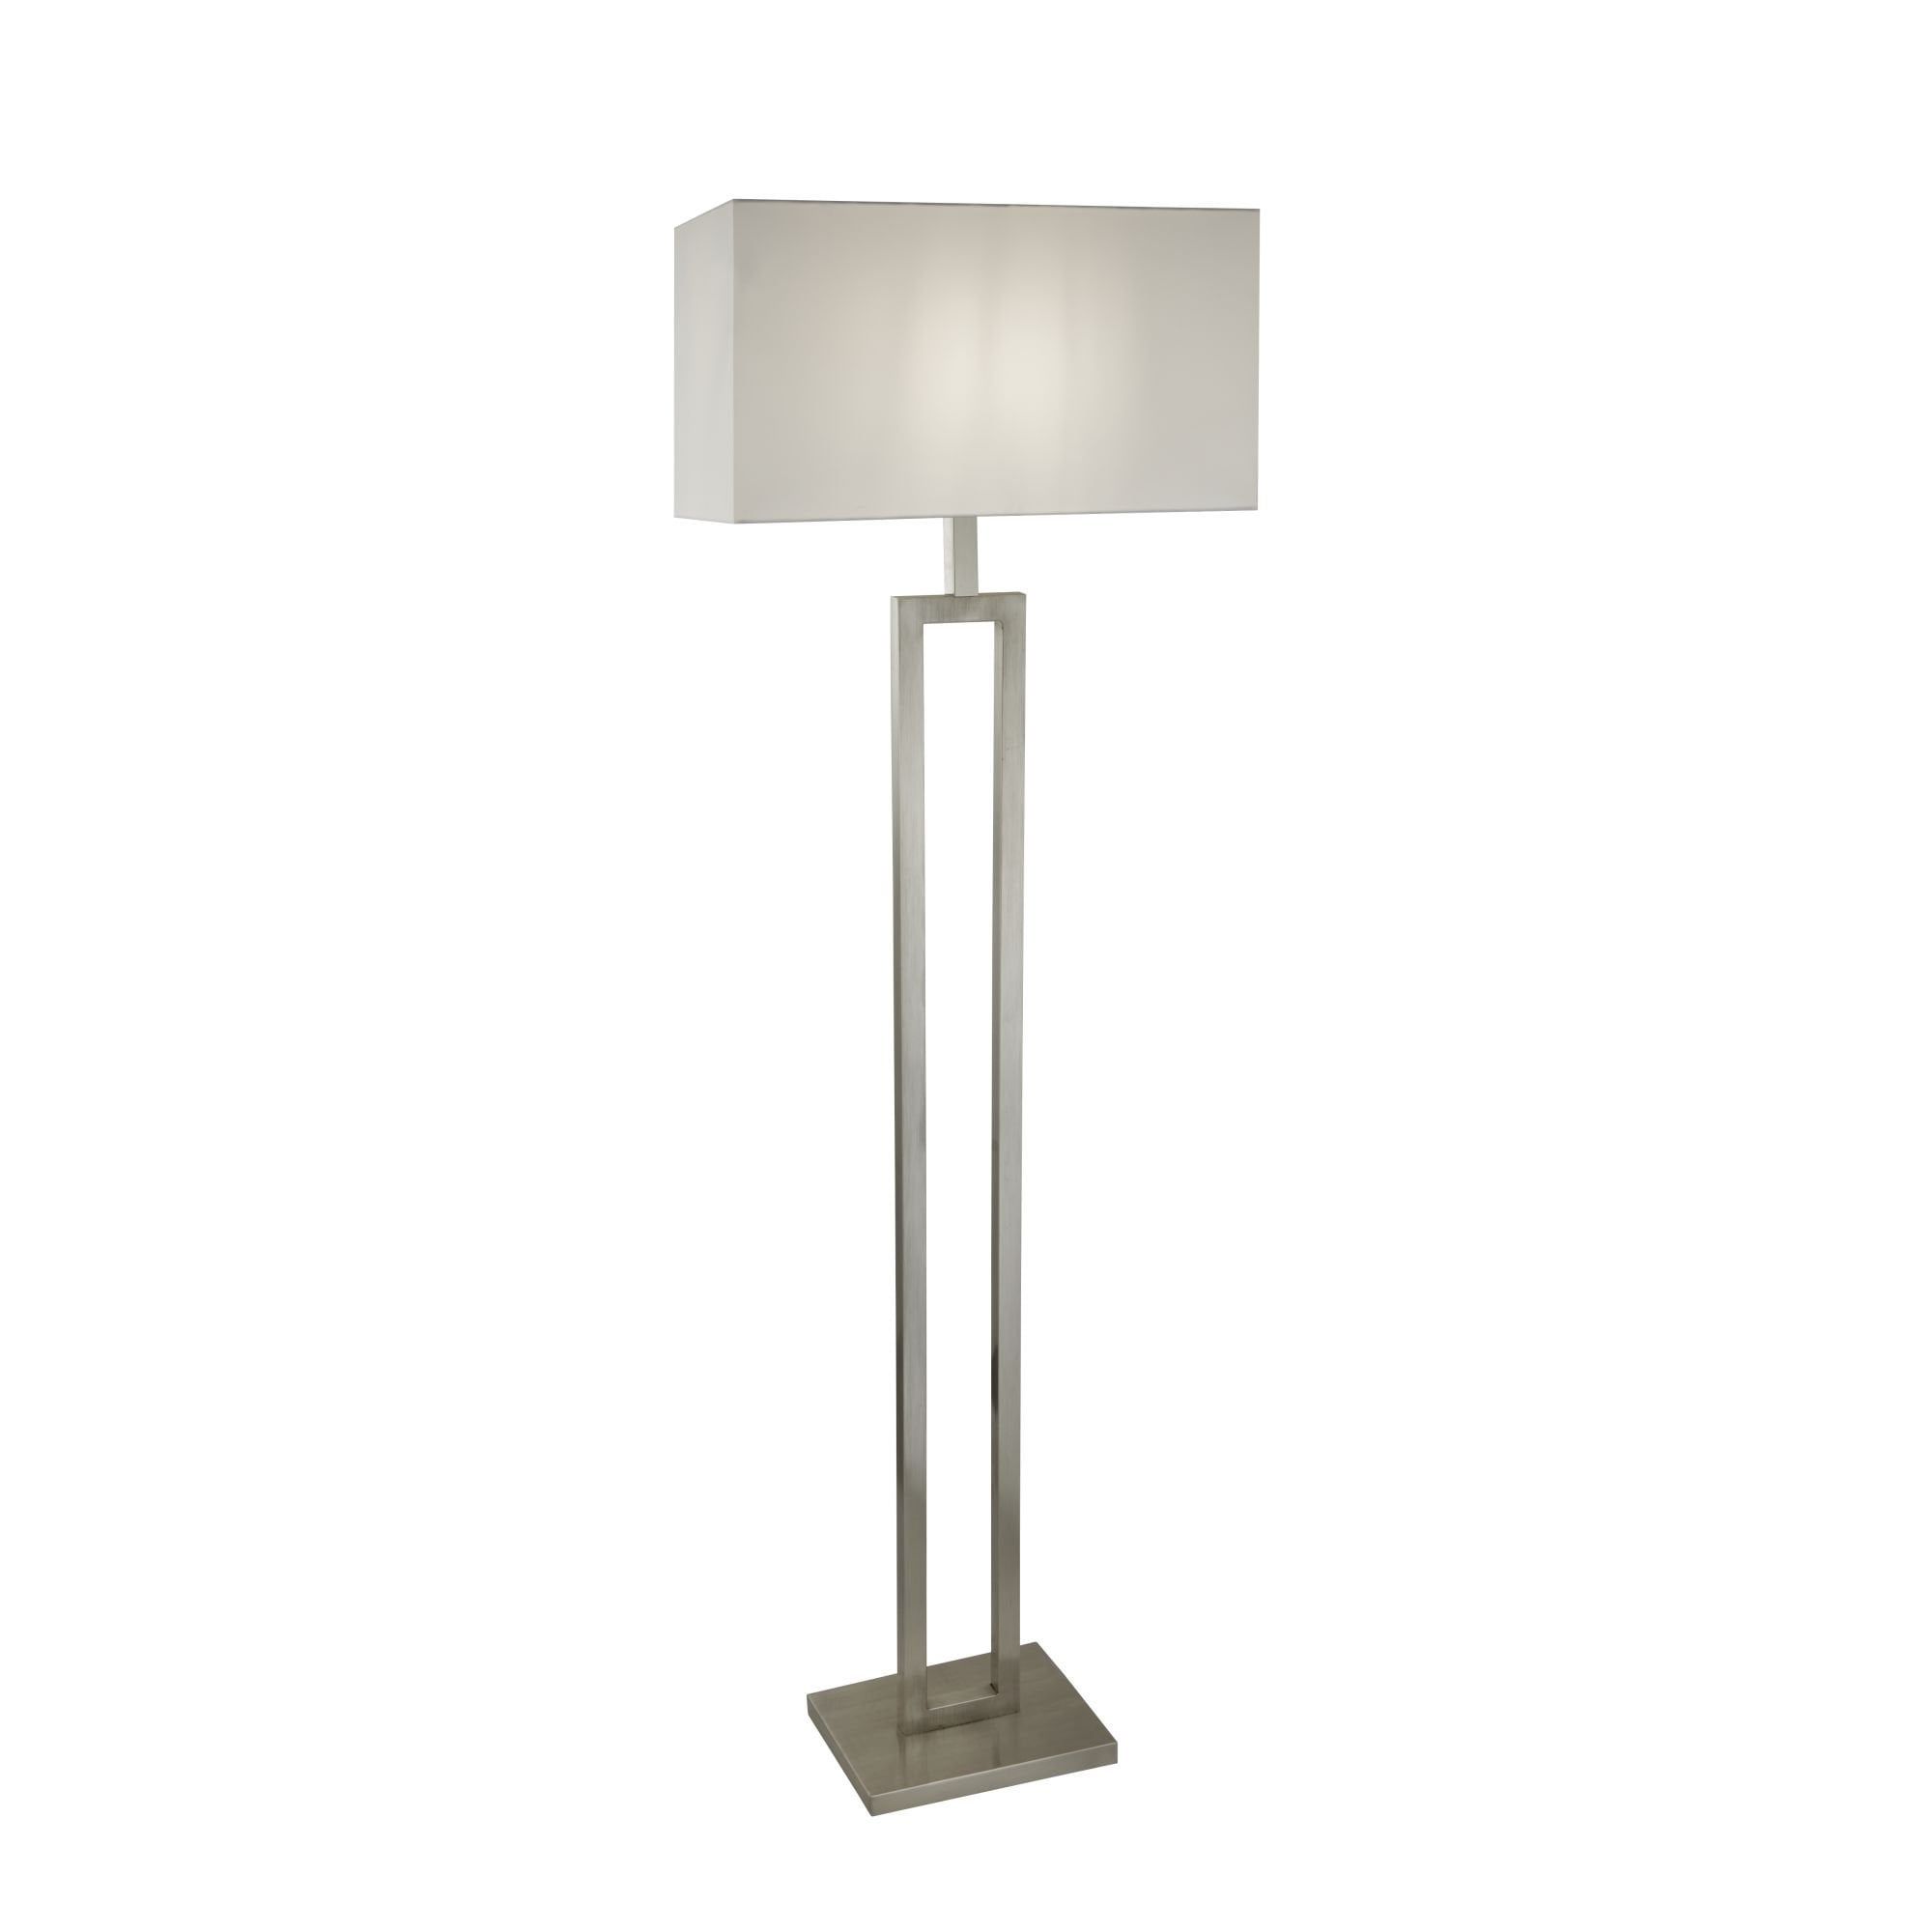 2330ss Floor Lamp Satin Silver White Shade With Silver Floor Lamps (View 7 of 20)